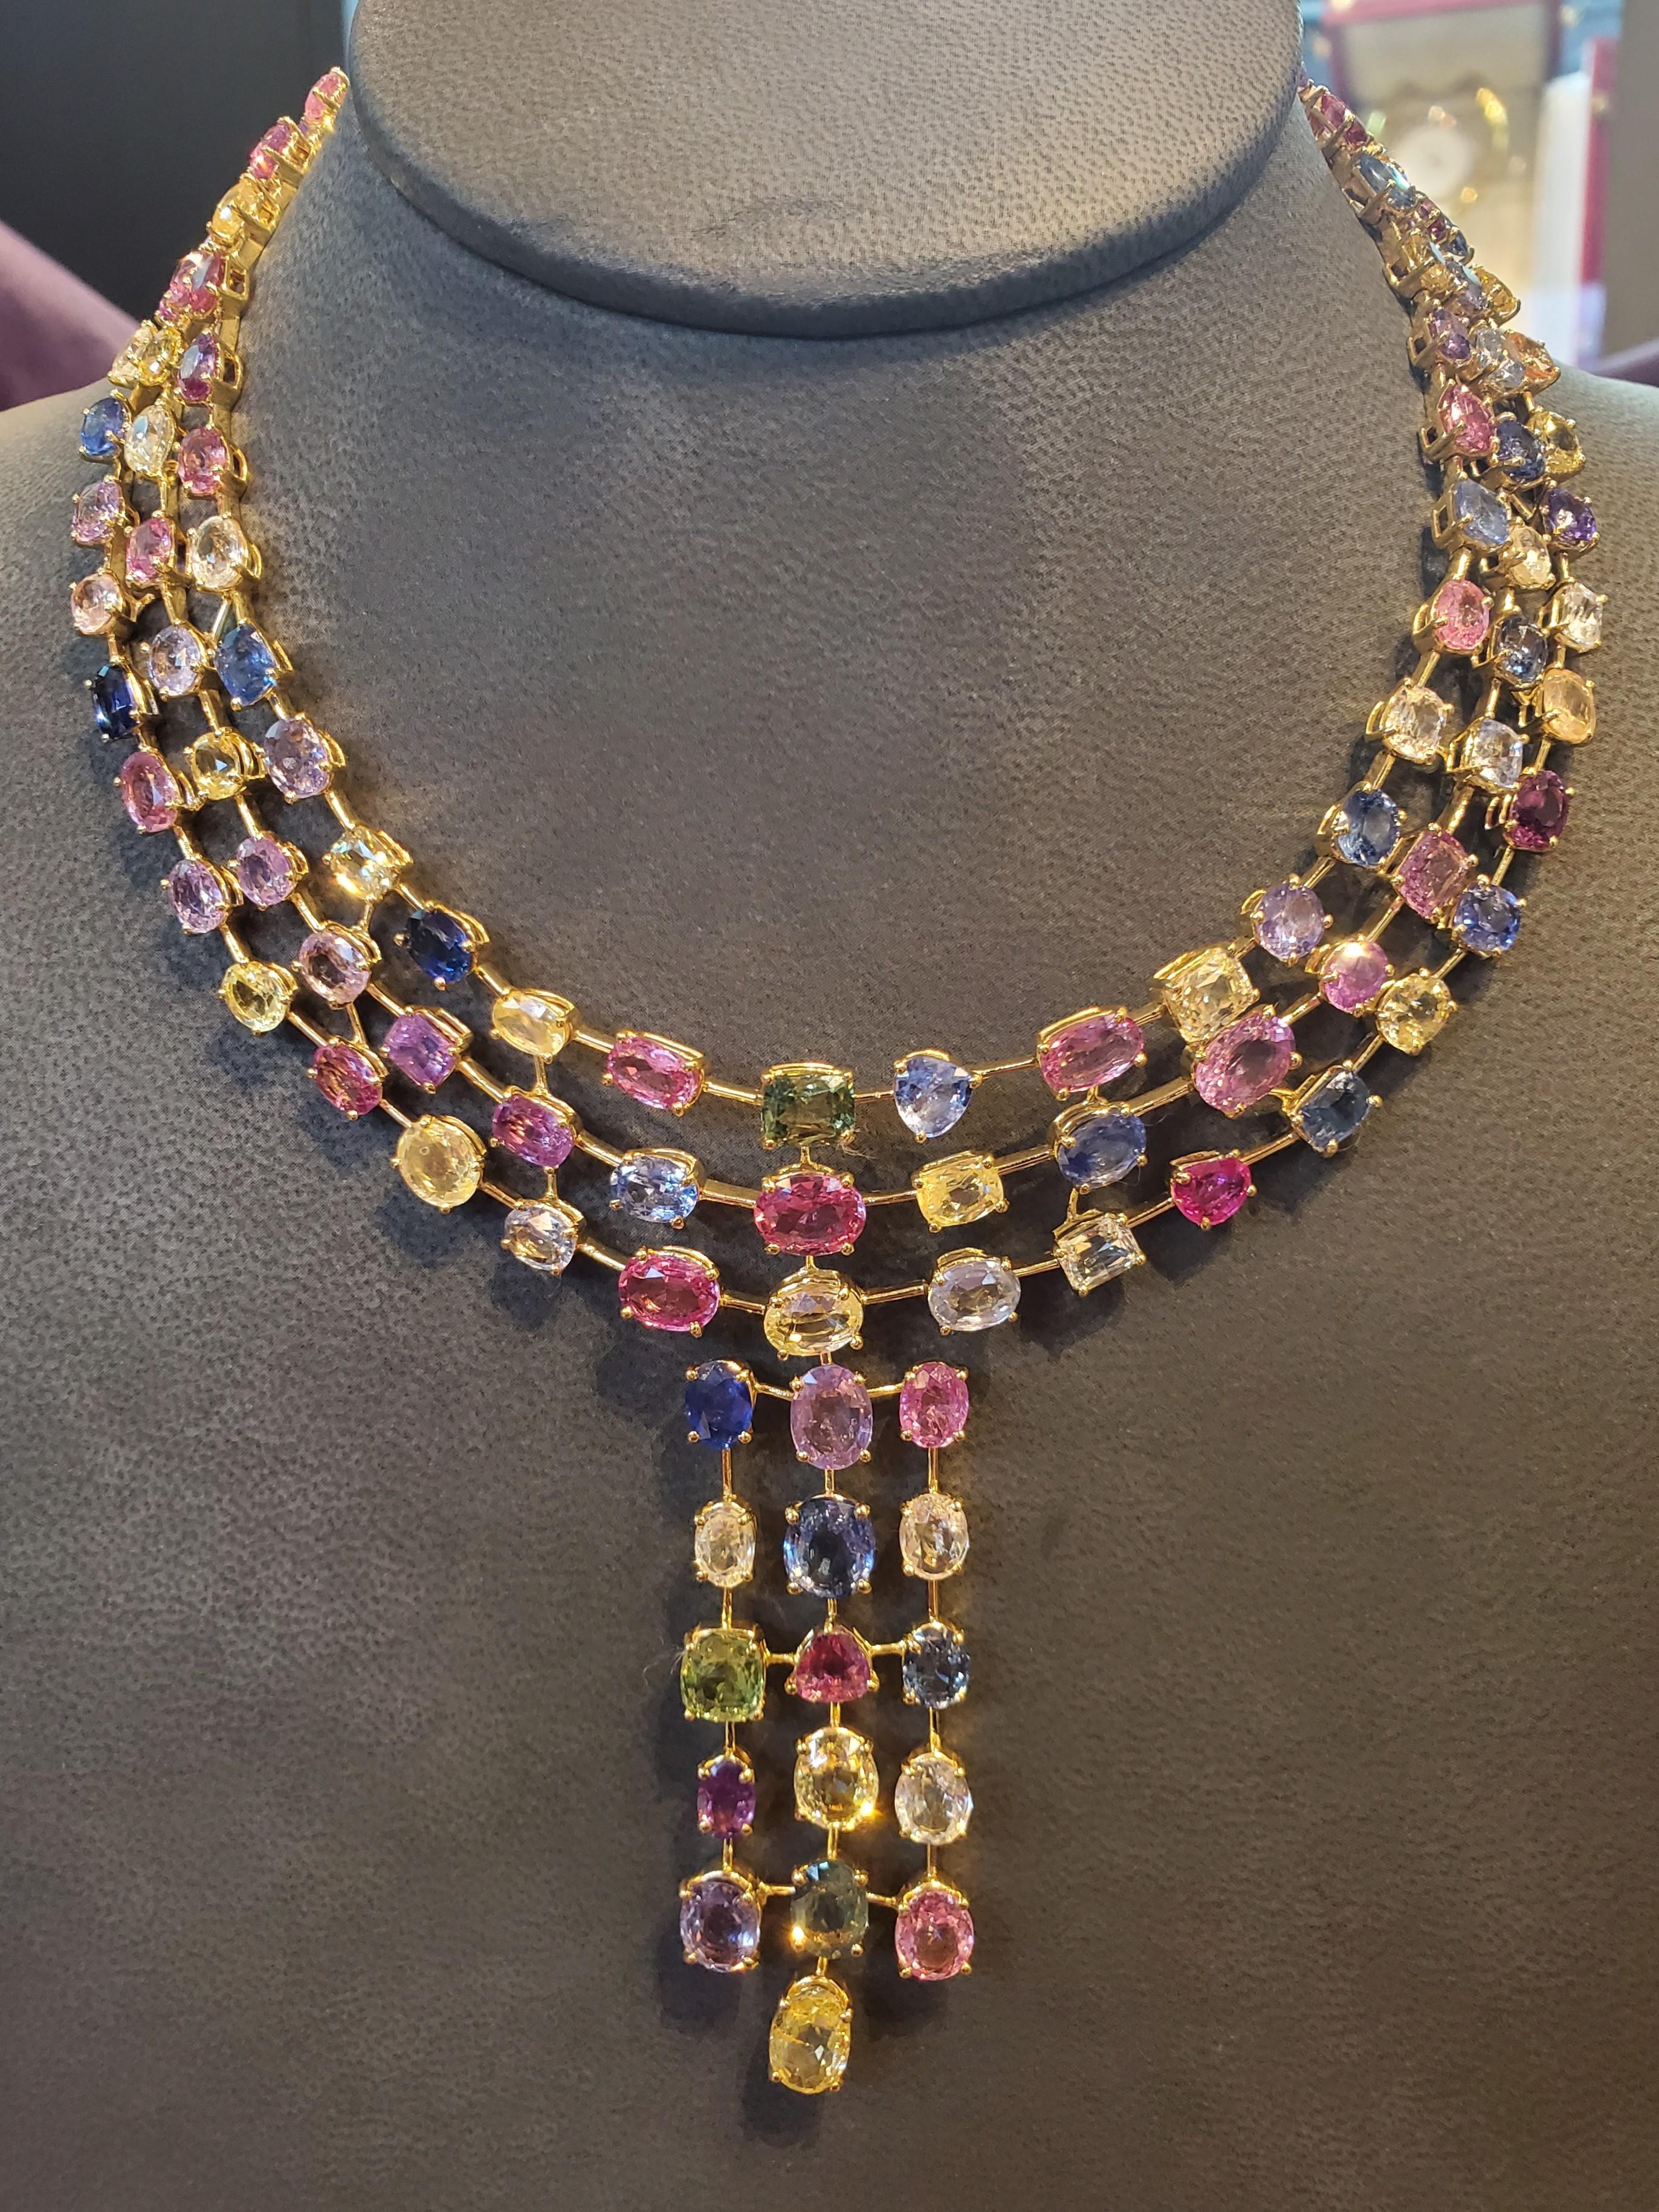 Multi-Colored Sapphire Necklace

Features 142 sapphires in a variety of colors totaling 137.40 cts

18K Yellow Gold

Measurements: 18 inches long